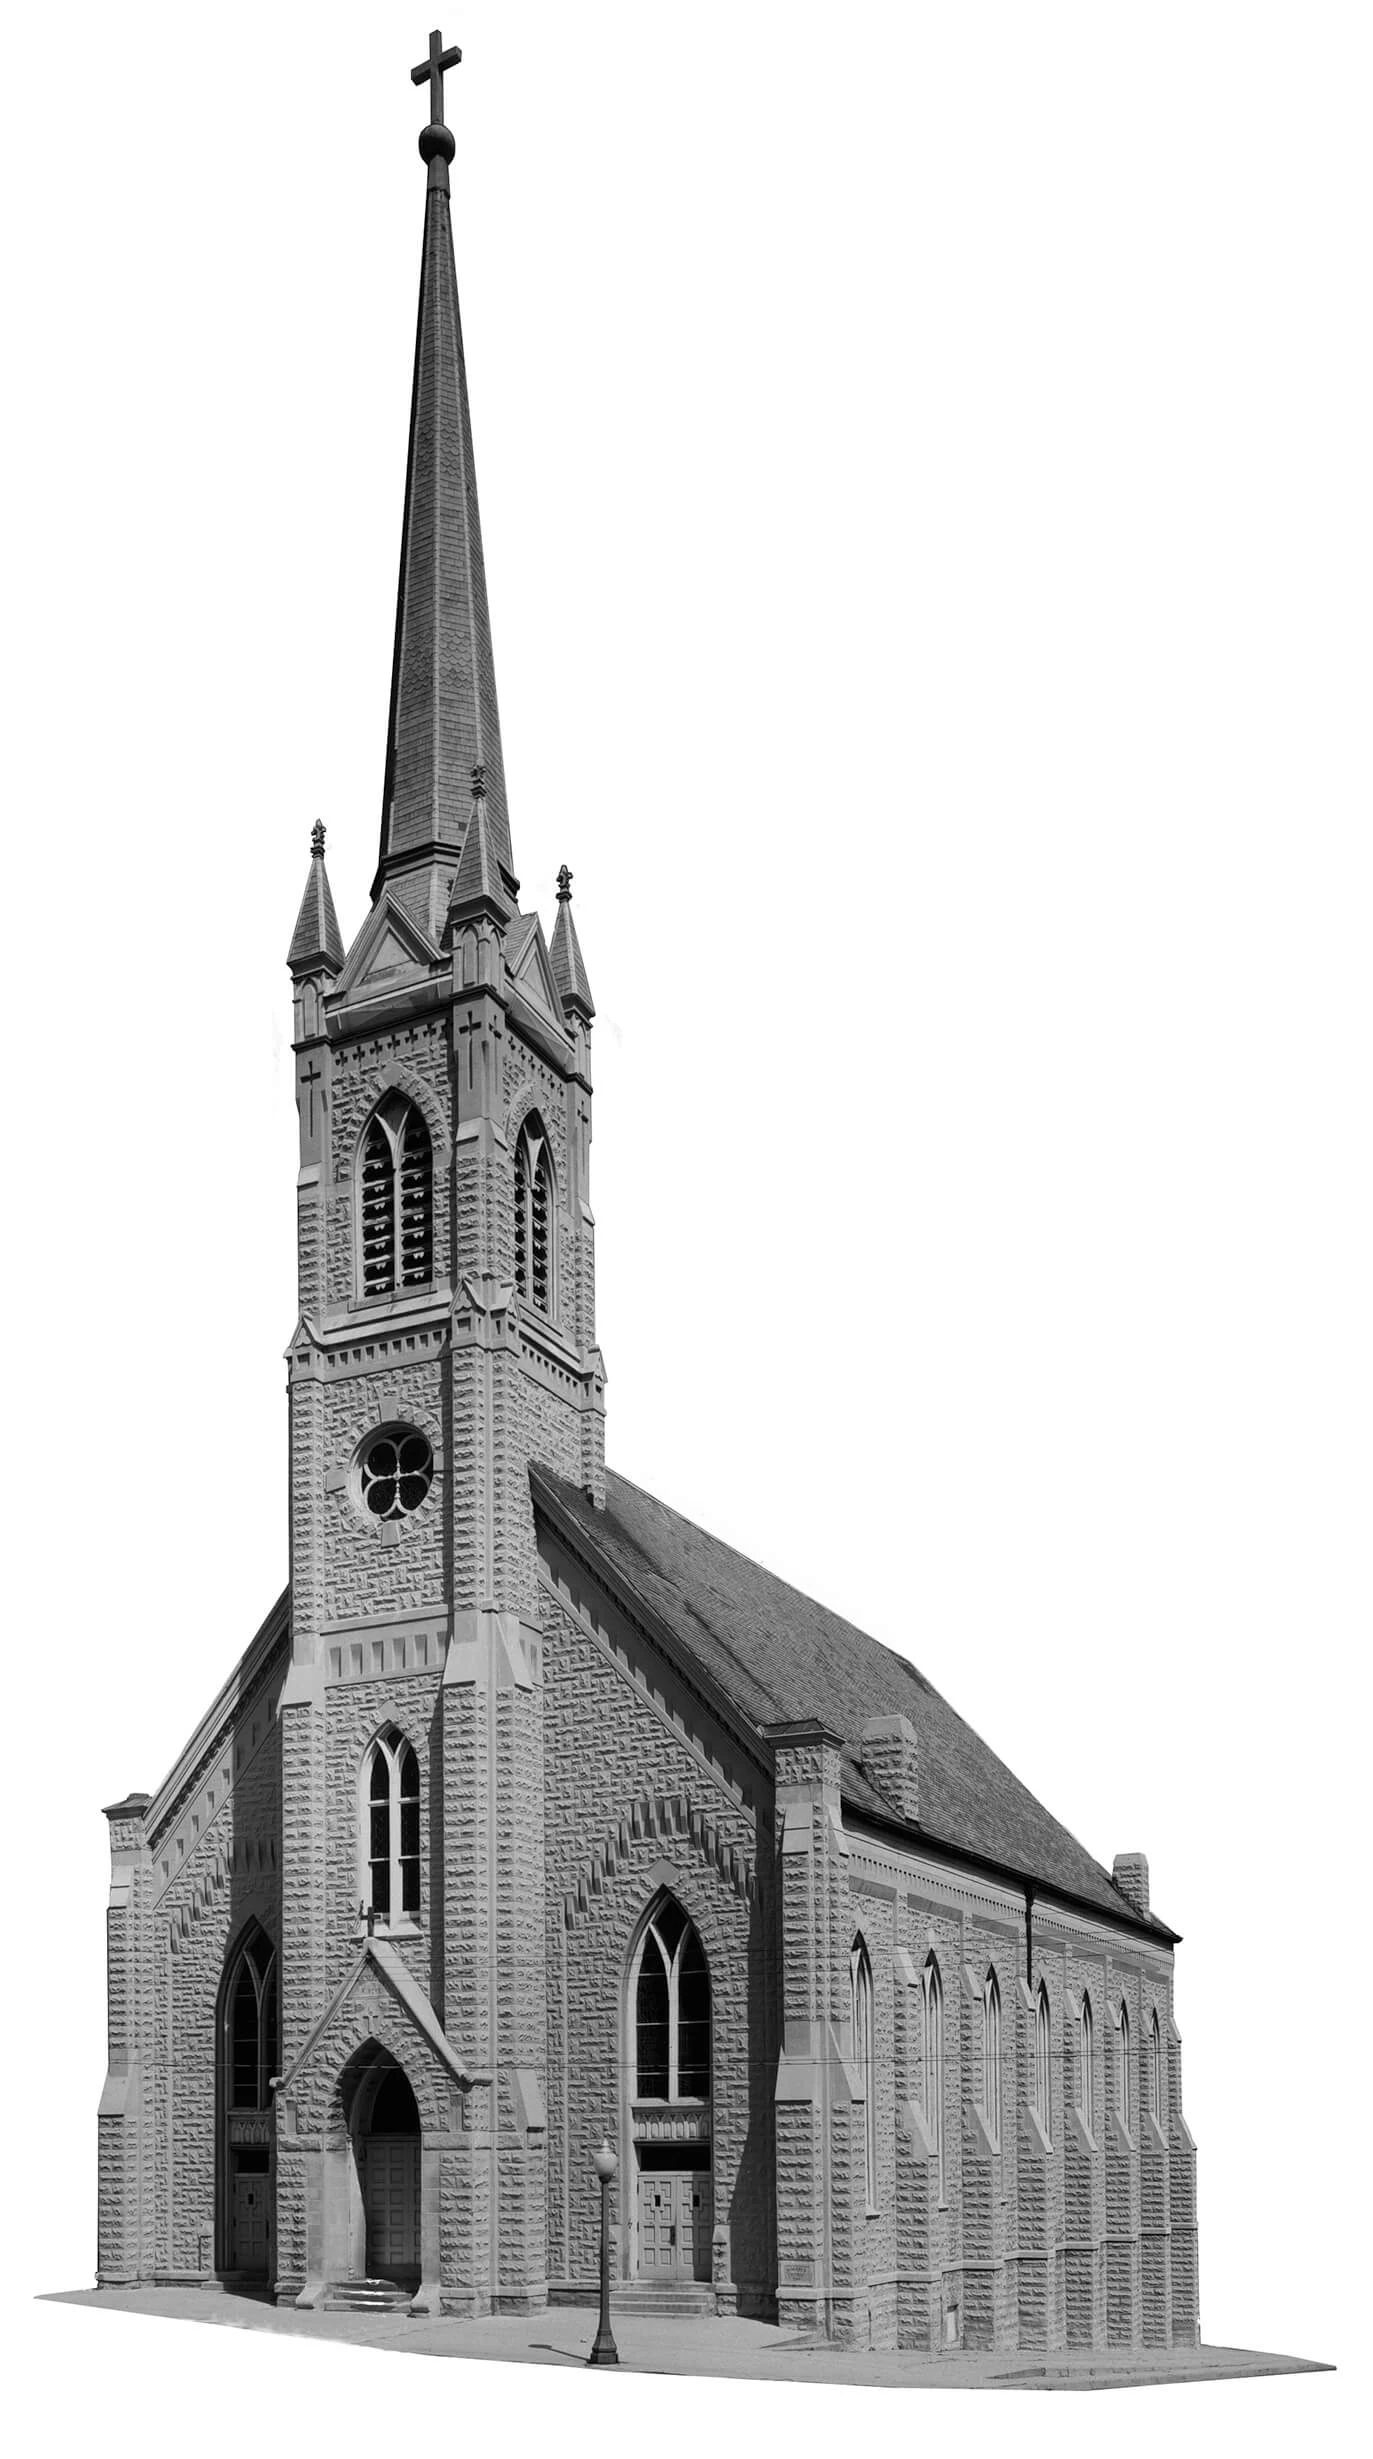 Black and white photo of a brick church with a very tall steeple.